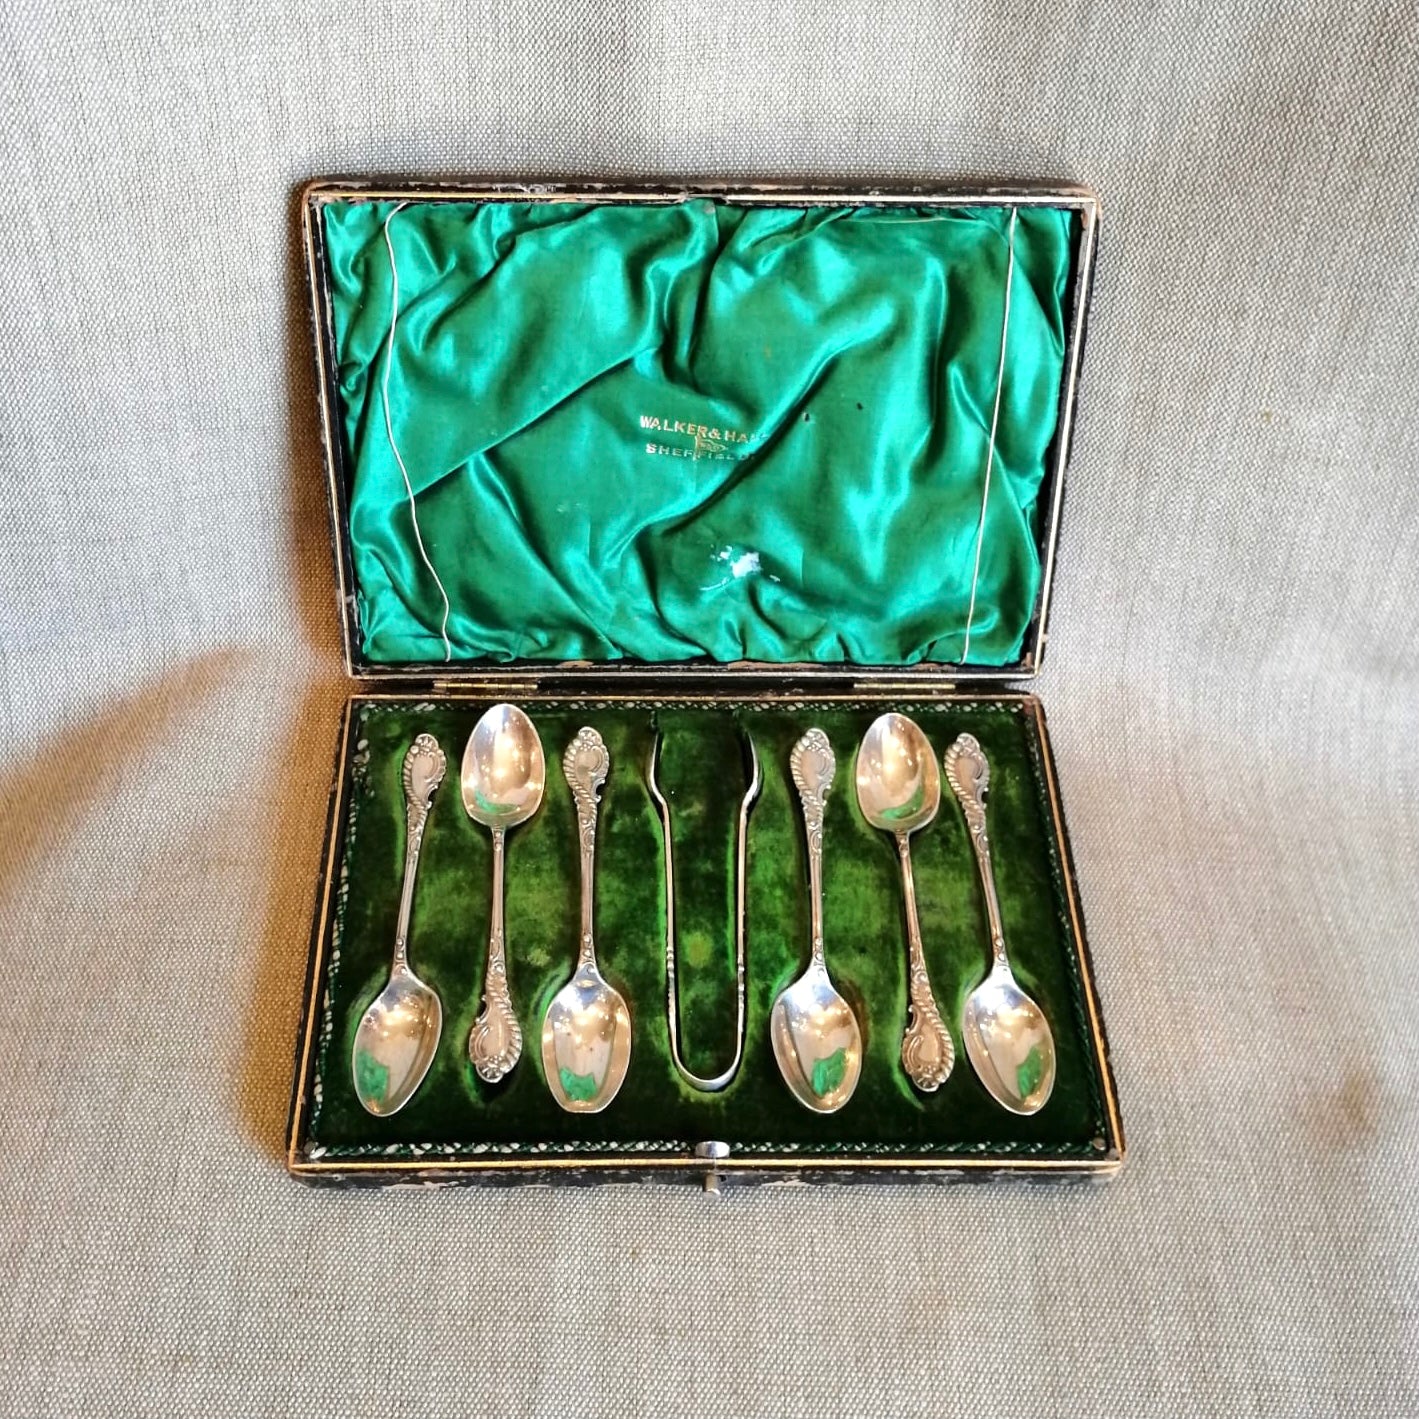 Walker & Hall Set Of Six Silver Spoons